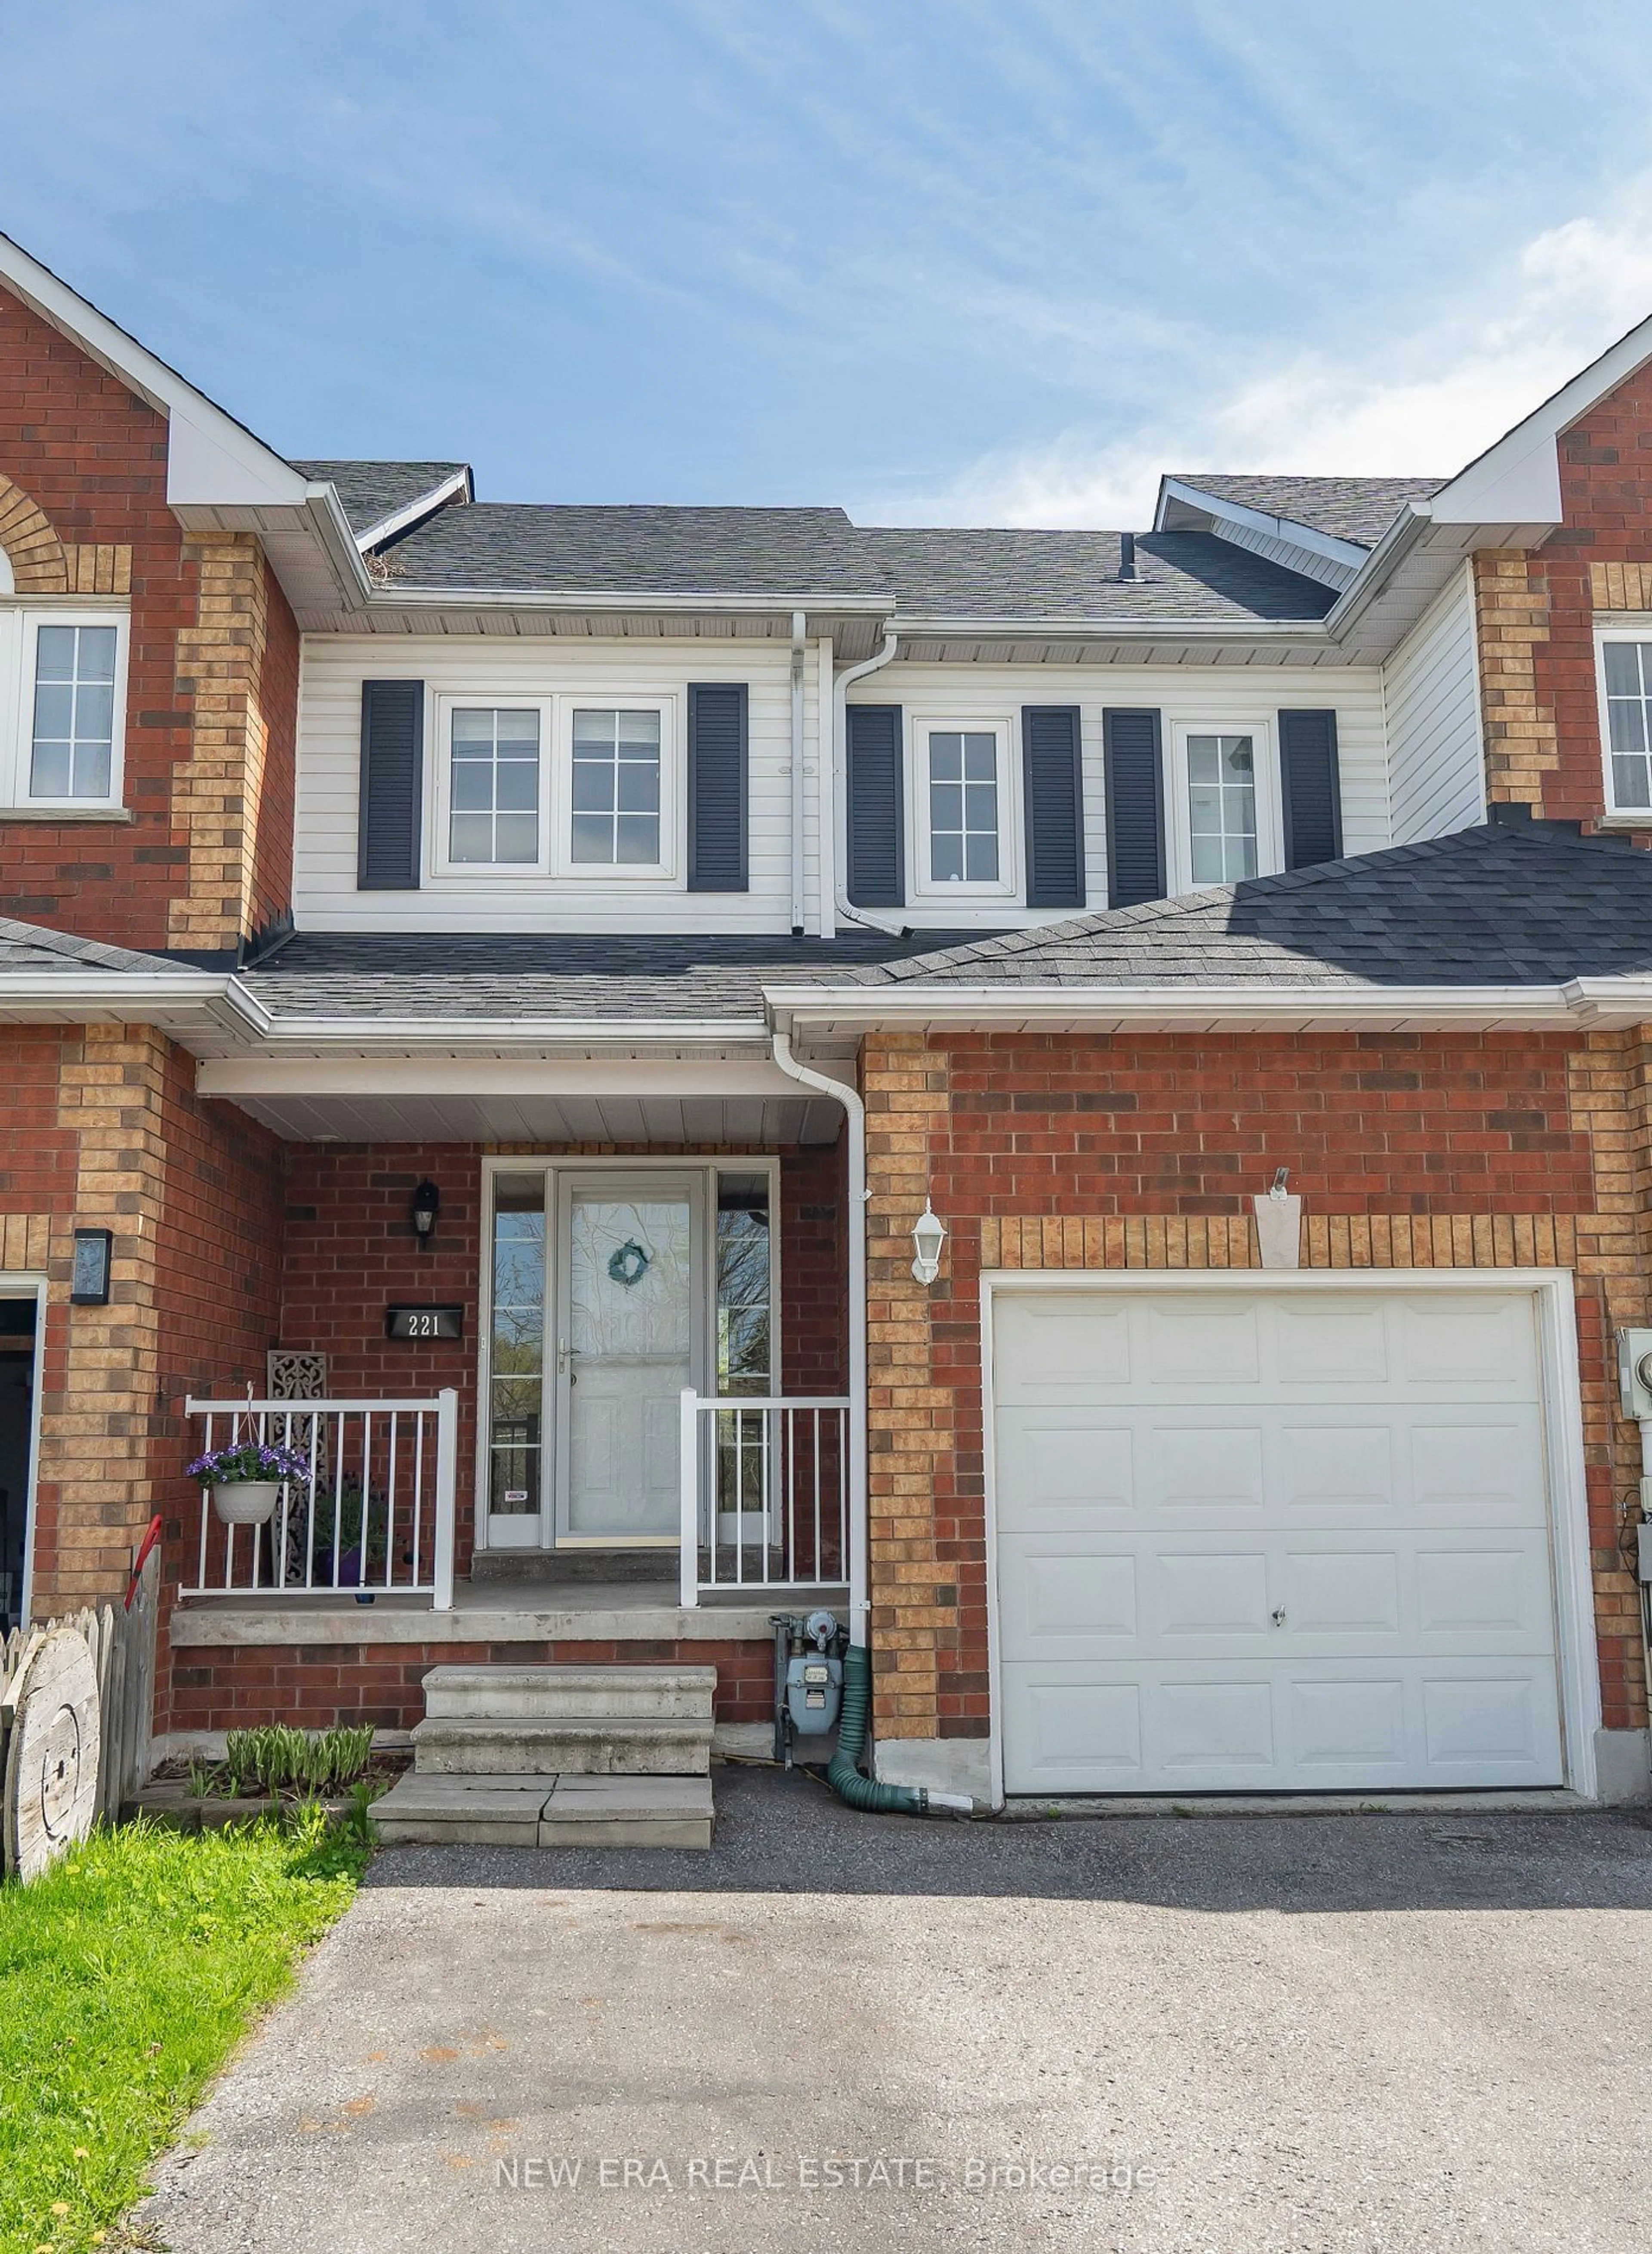 Home with brick exterior material for 221 Edward Ave, Oshawa Ontario L1H 3A6